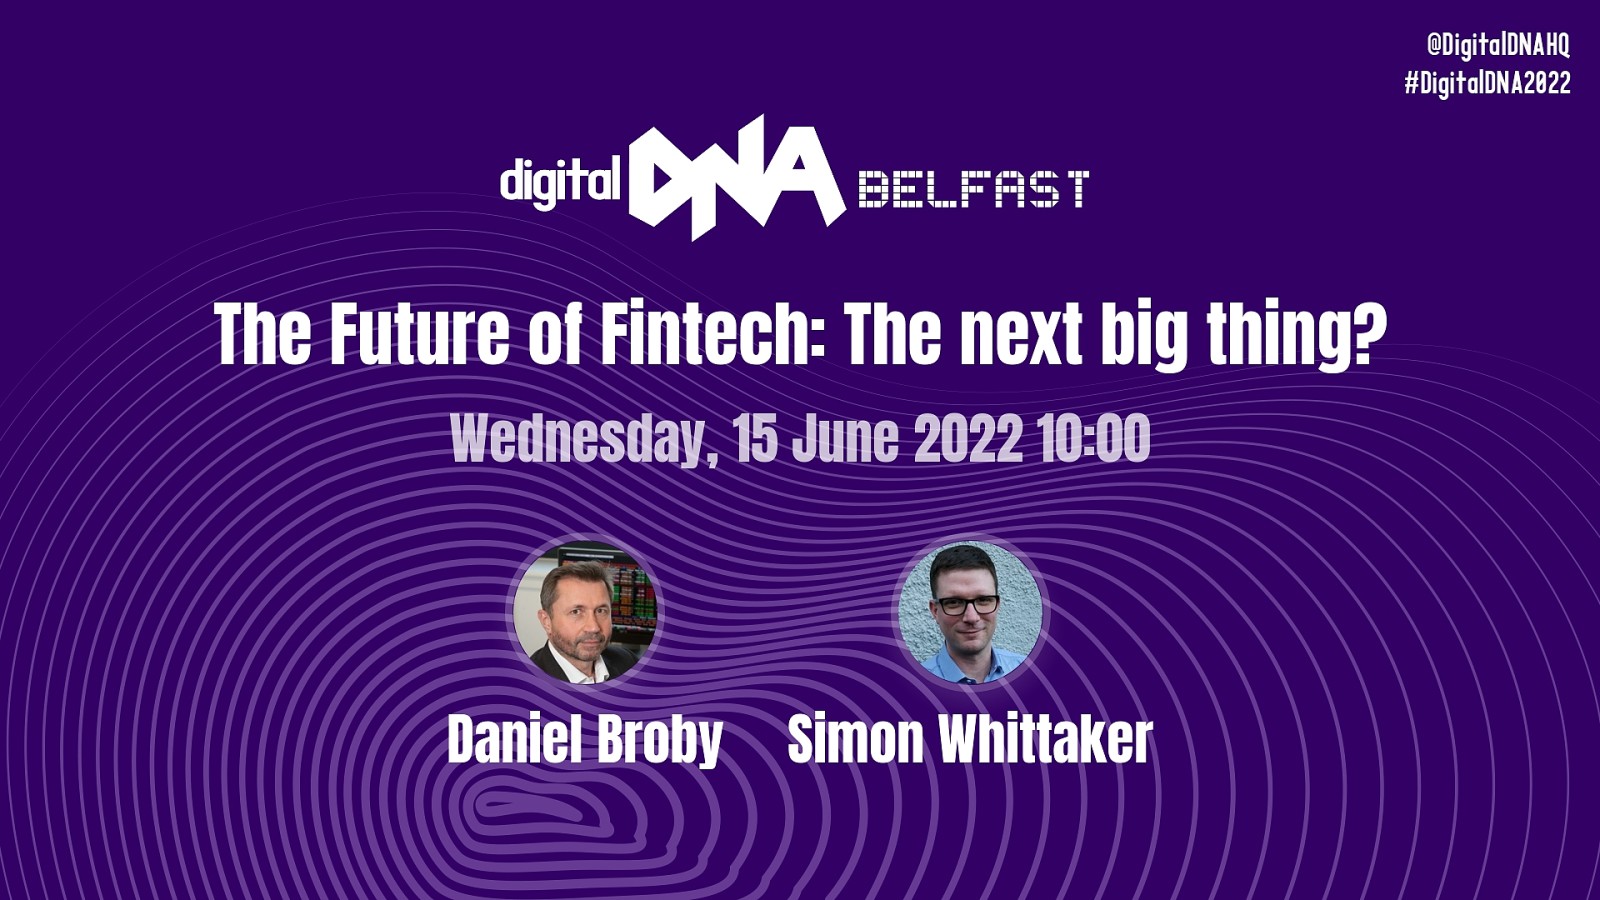 The Future of Fintech: The next big thing?